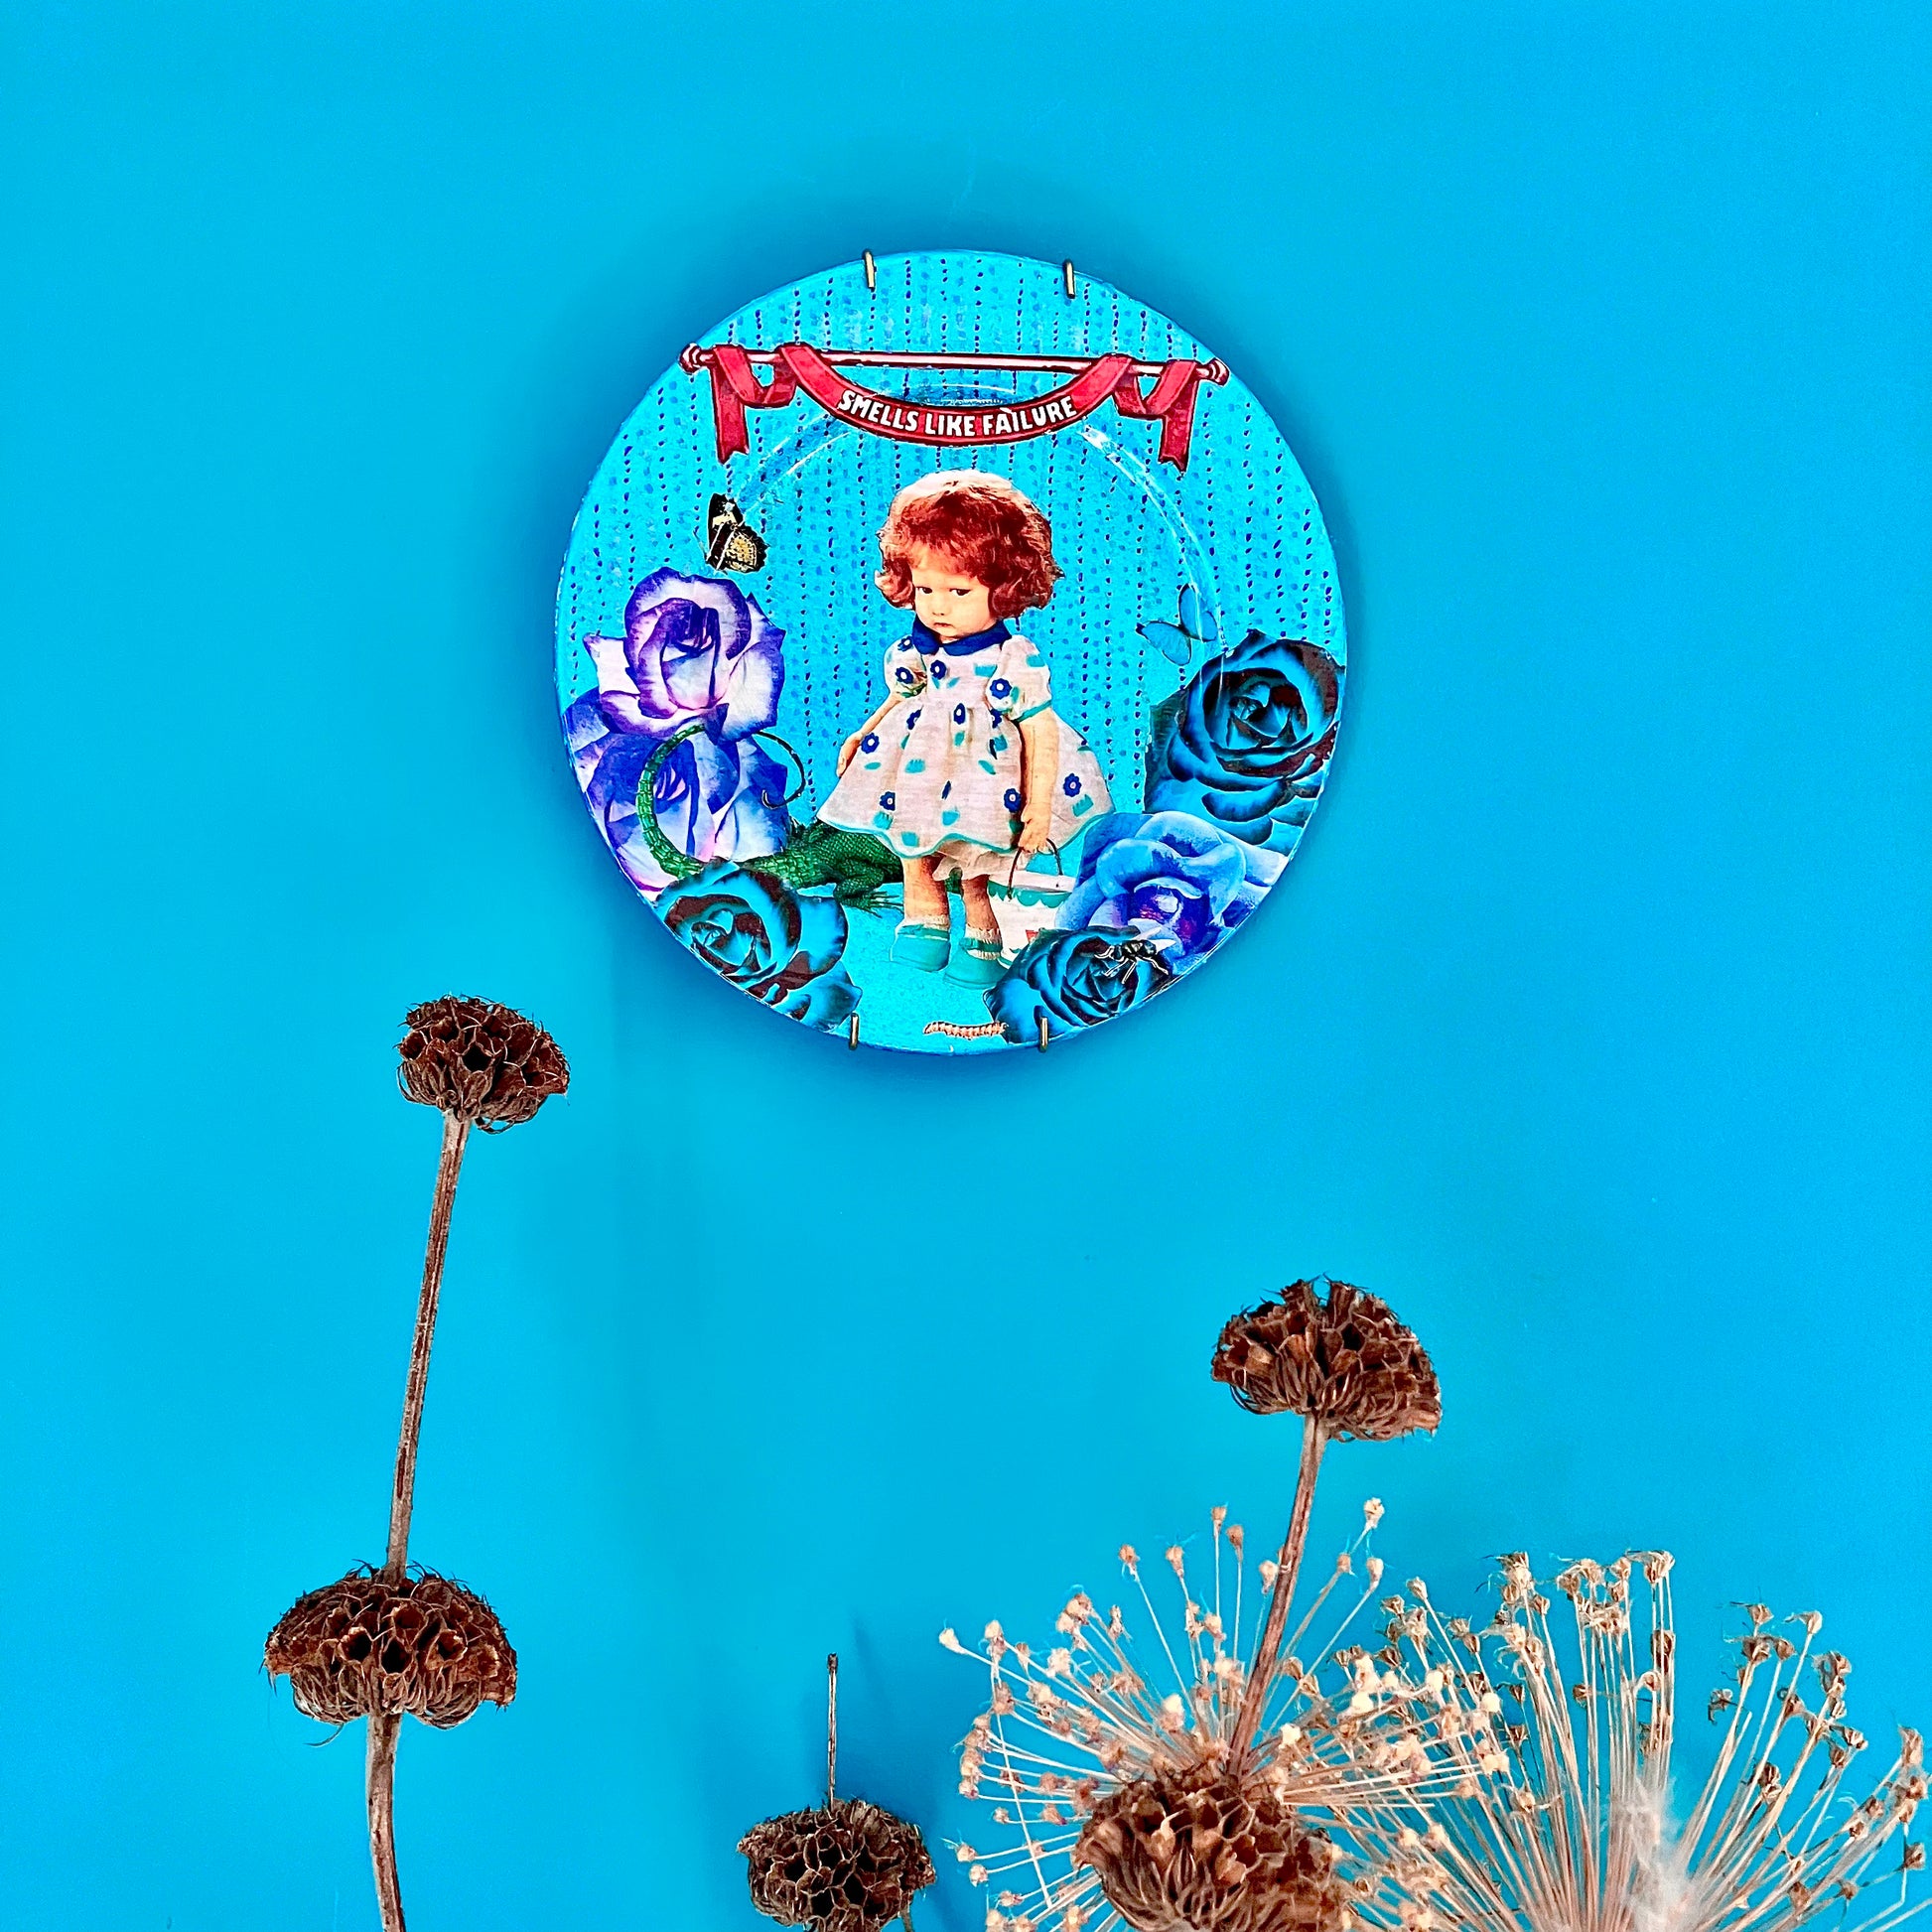 "Smells Like Failure" Wall Plate by House of Frisson, hanging on a blue wall.